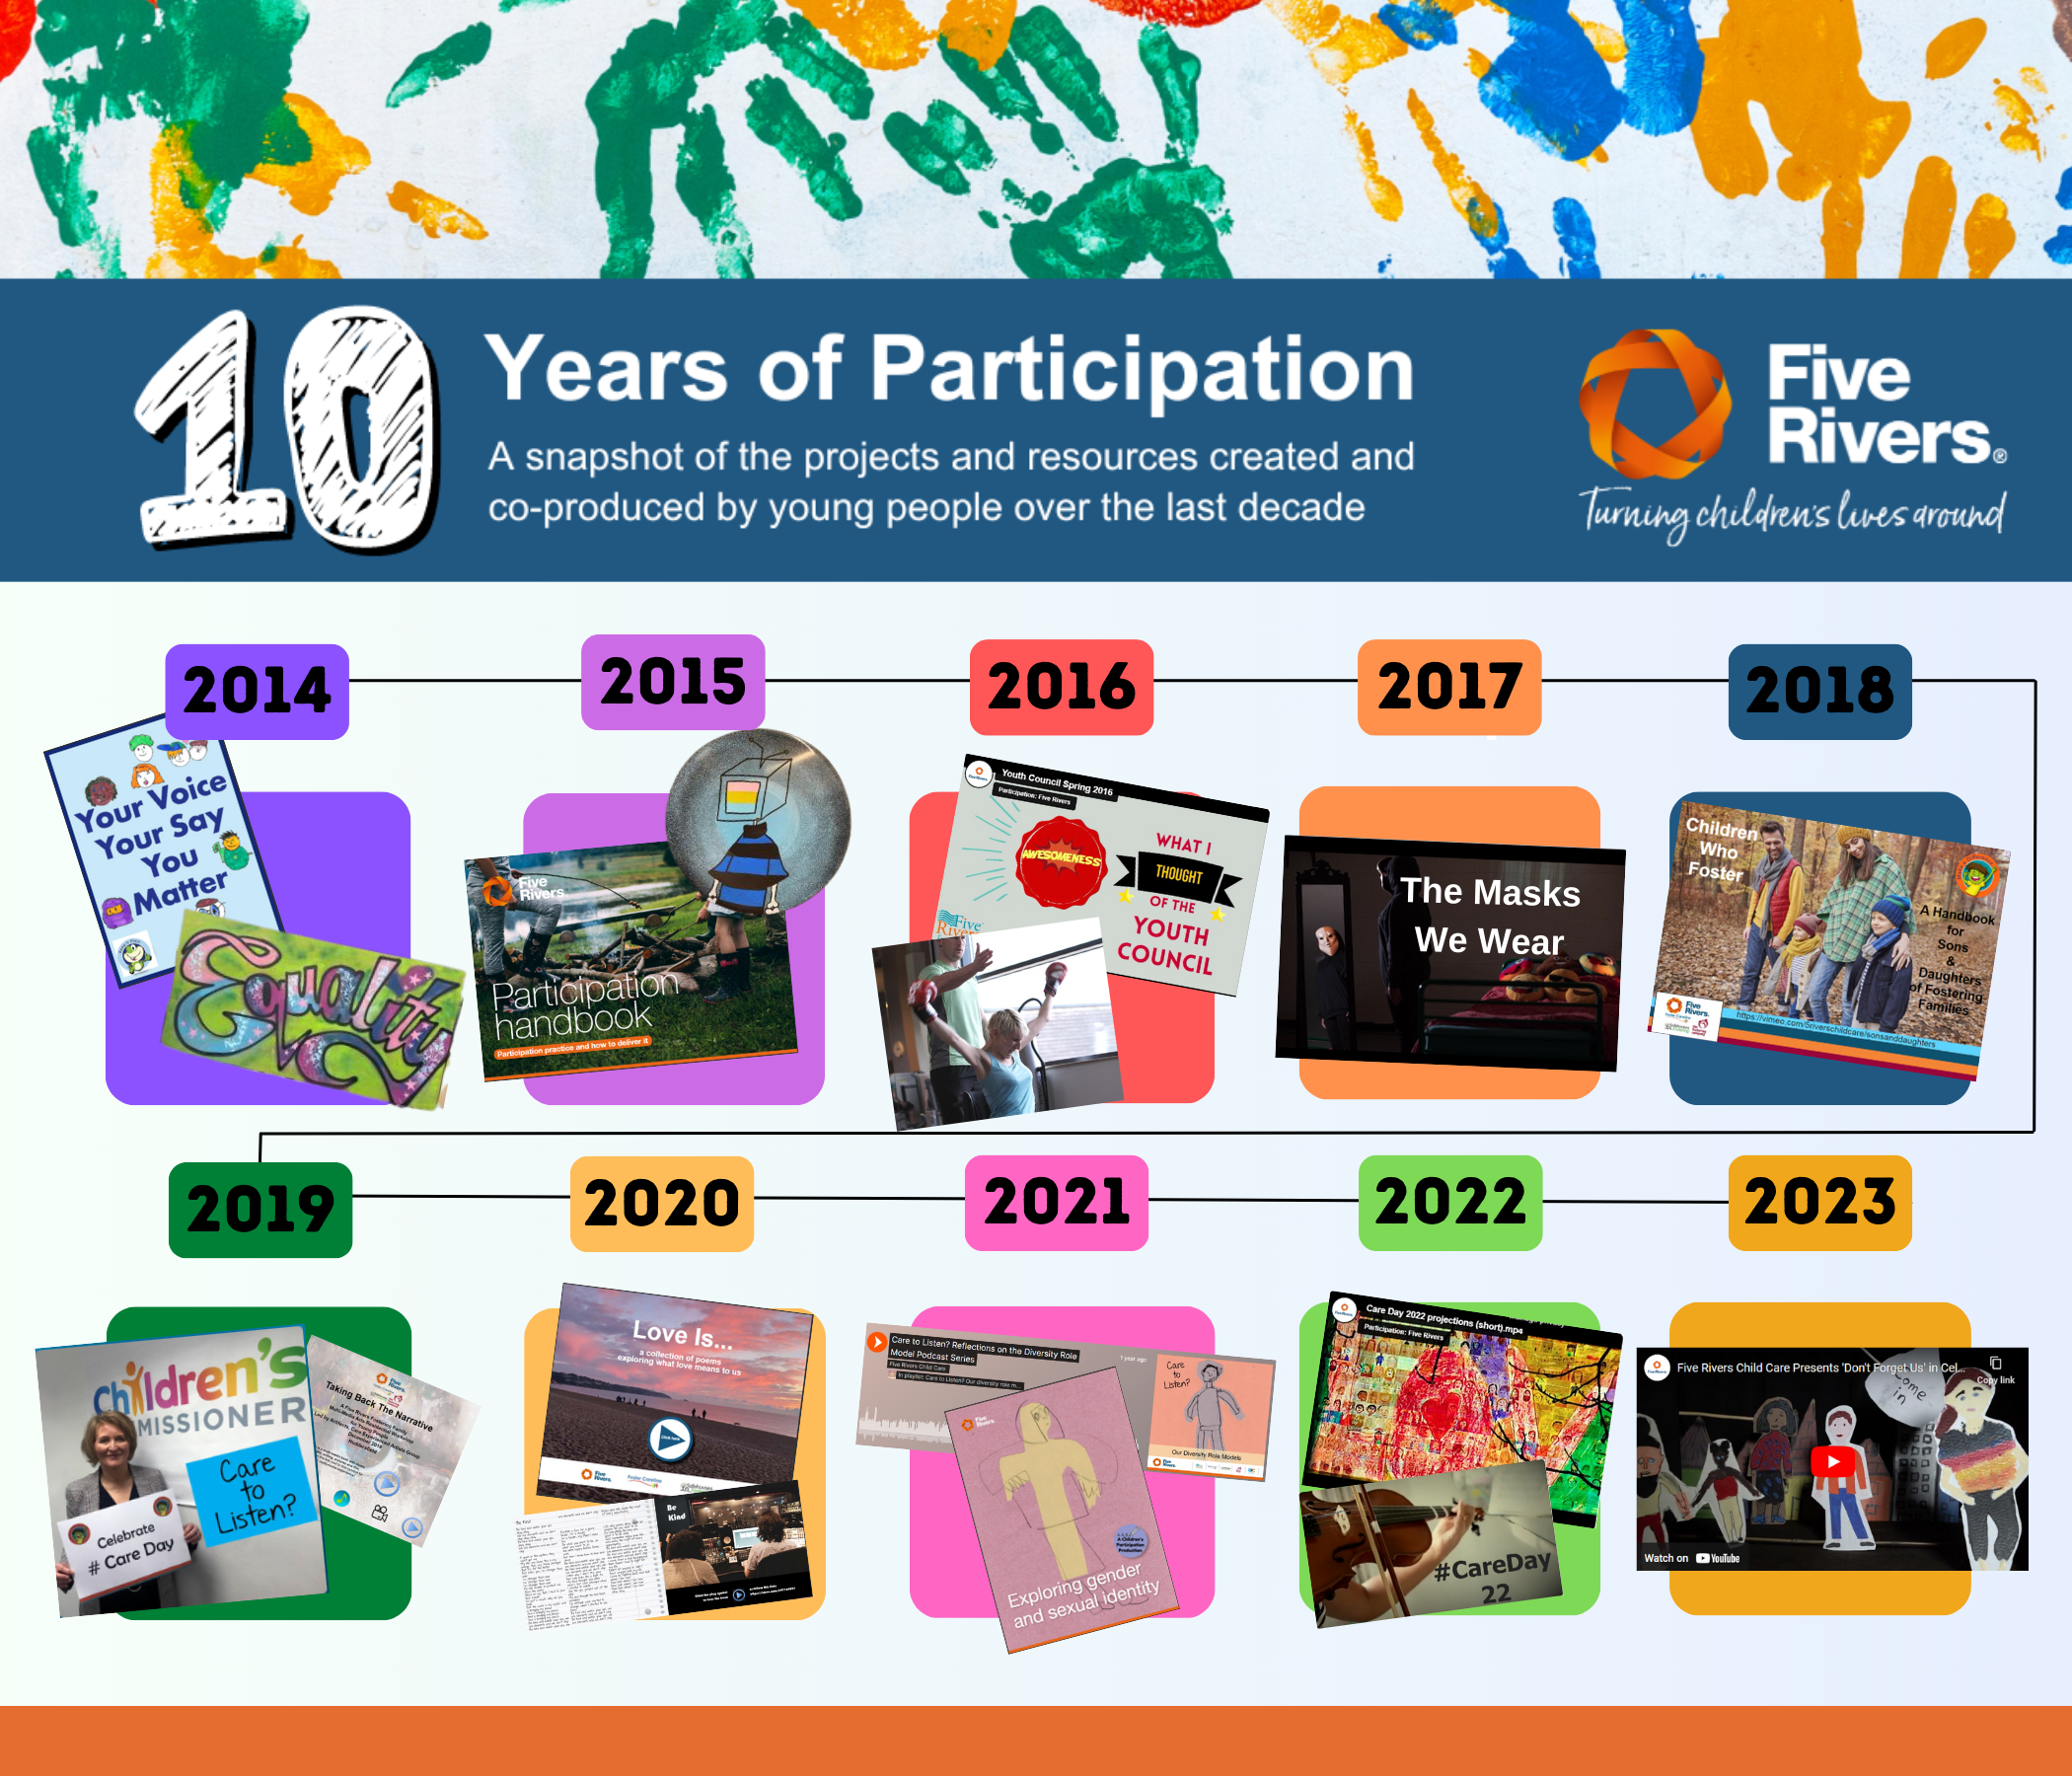 10 years of participation at Five Rivers